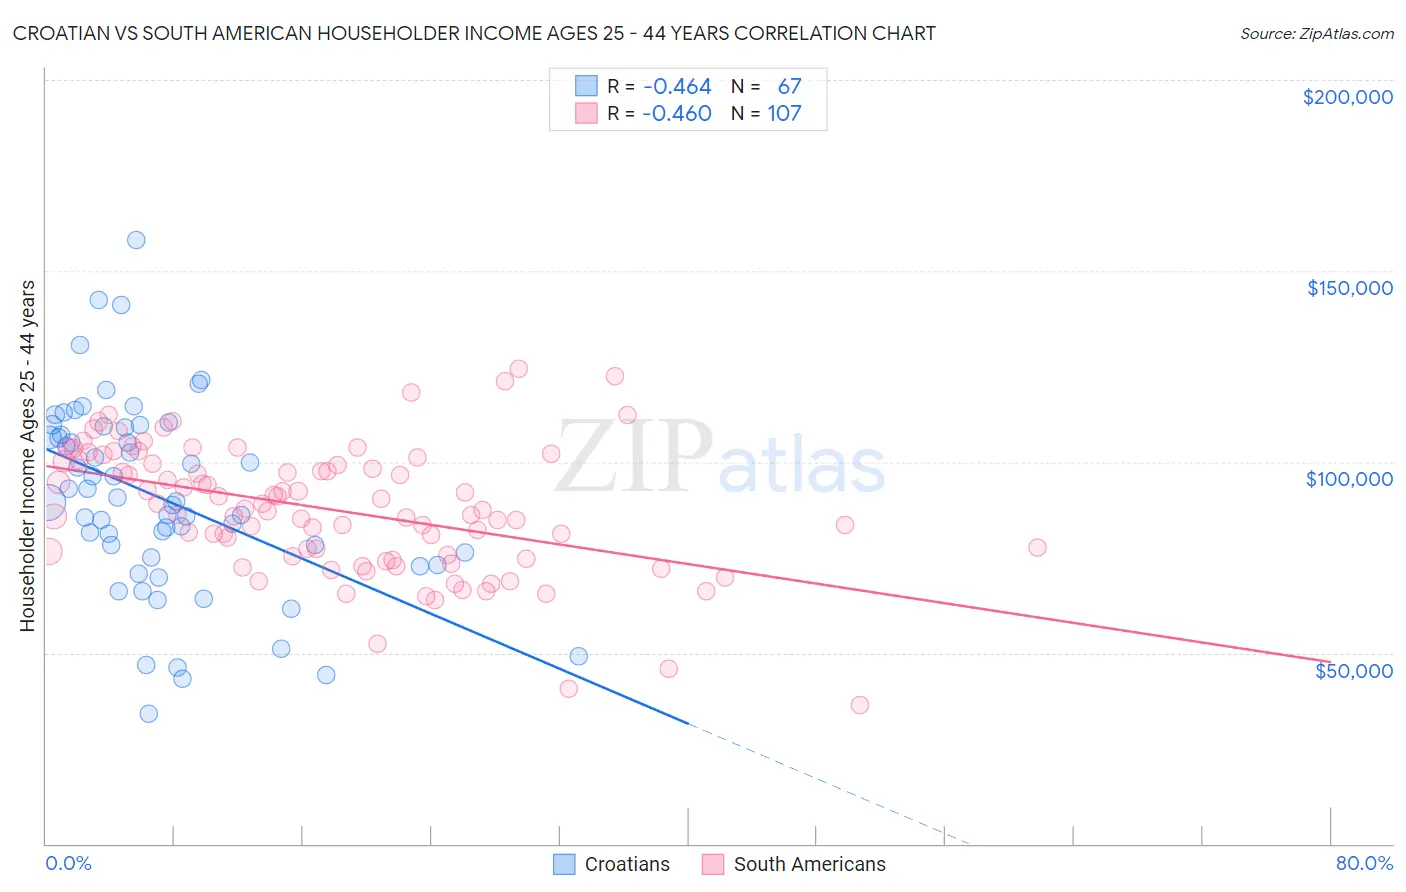 Croatian vs South American Householder Income Ages 25 - 44 years